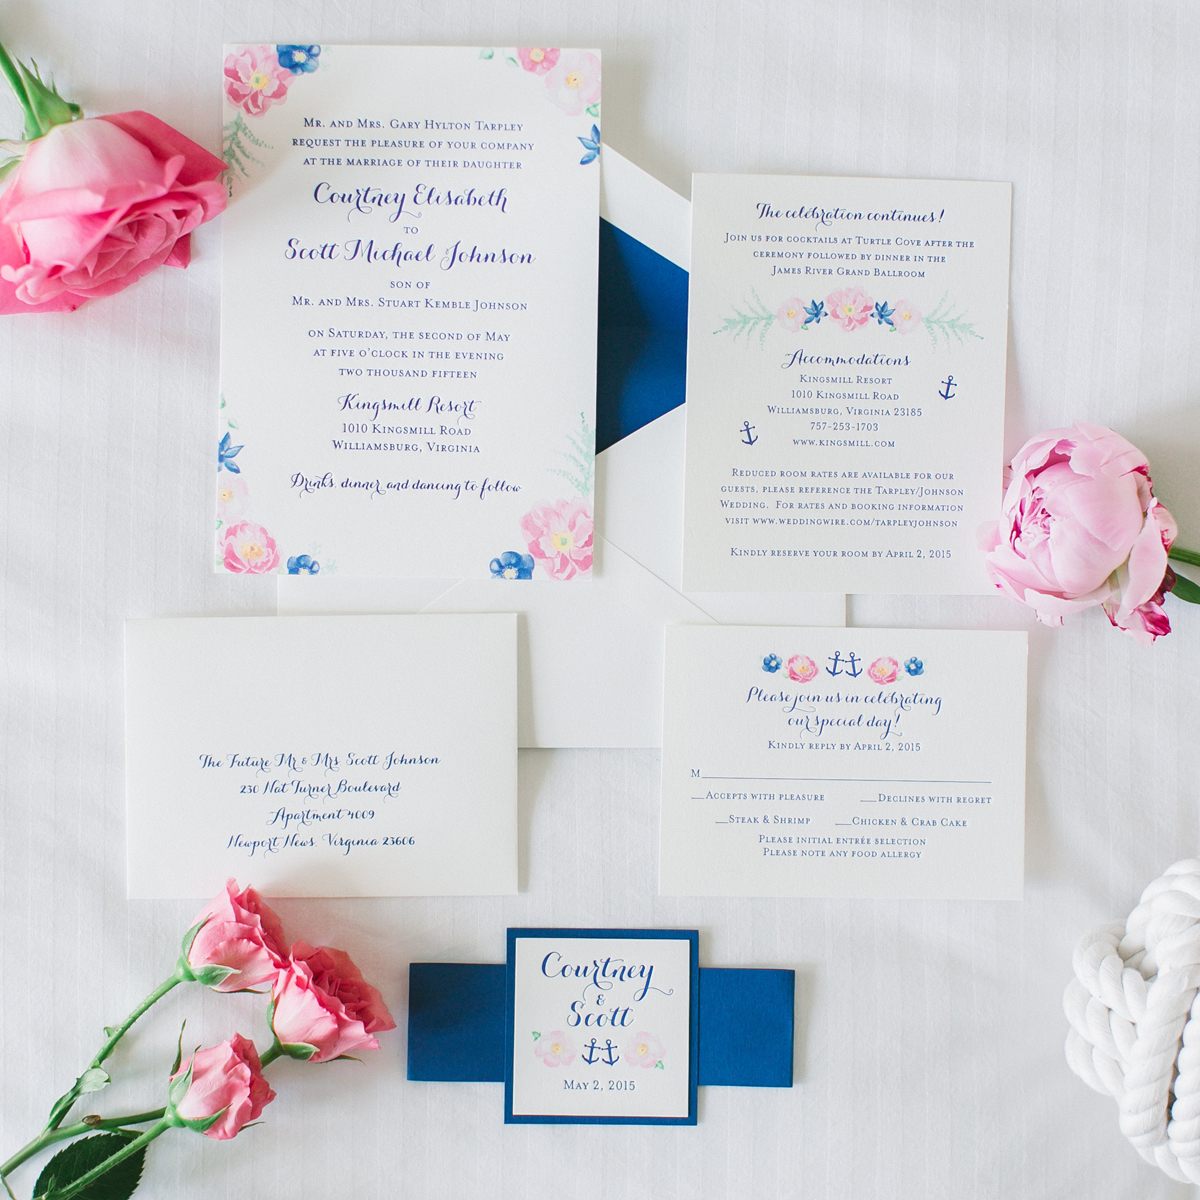 Gorgeous watercolor flowers and letterpress printed wedding invitation suite.